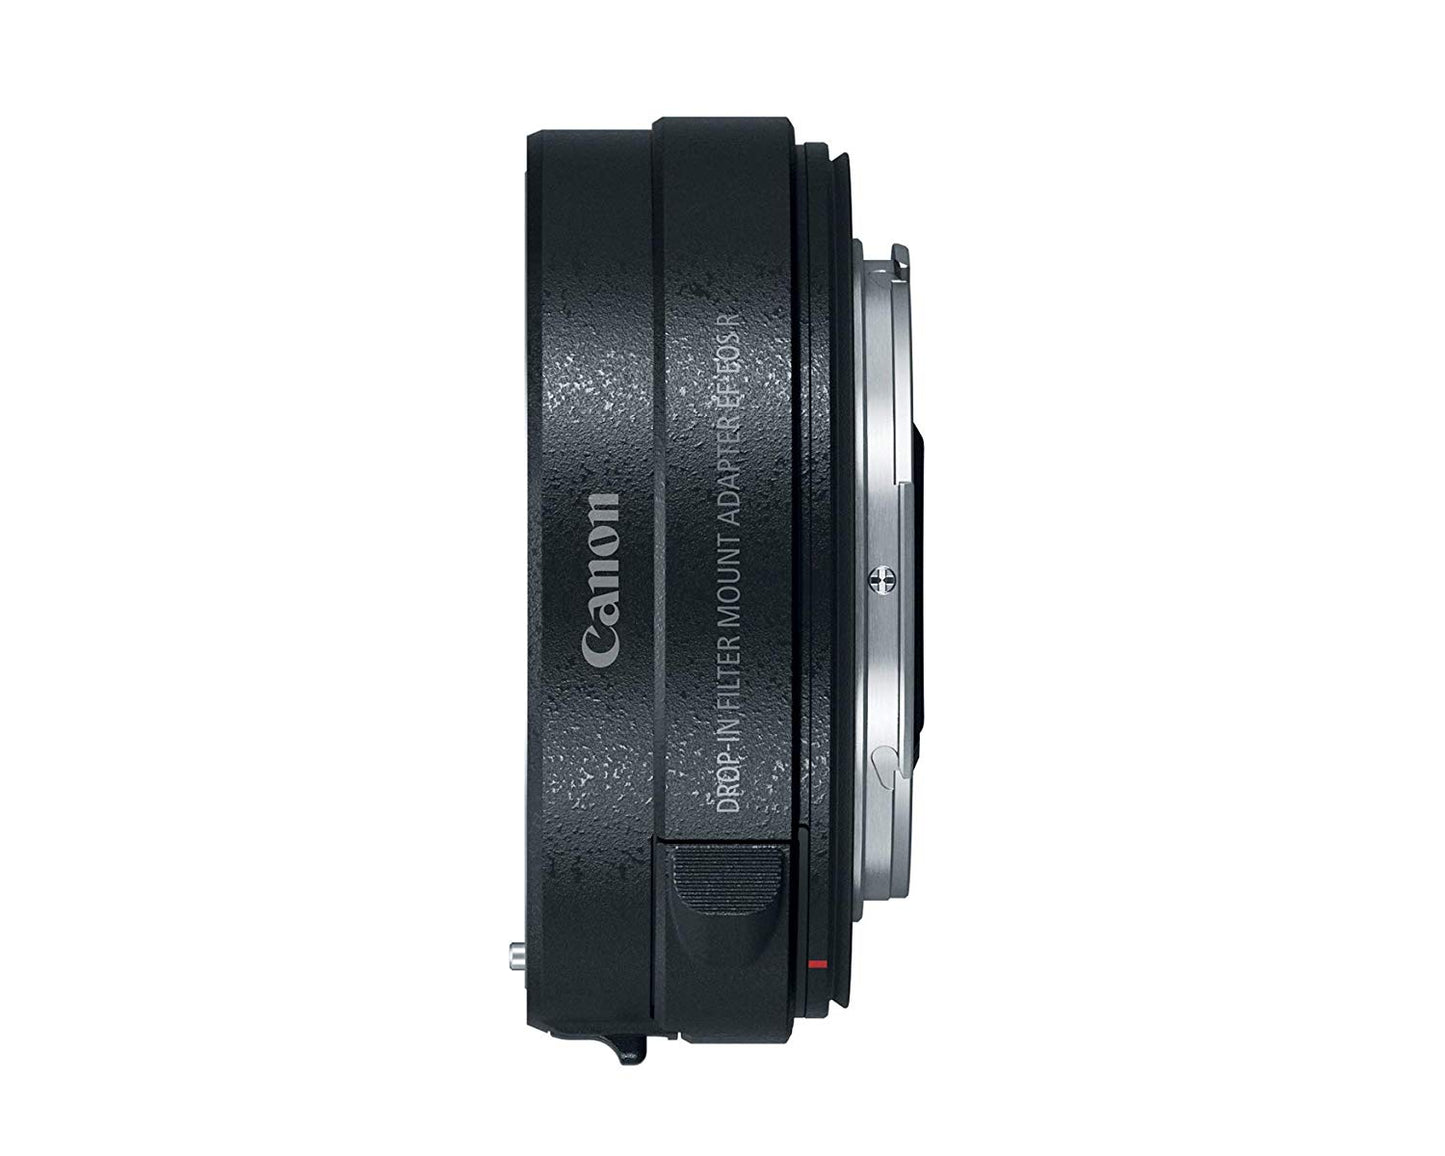 Canon Drop-in Filter Mount Adapter EF-EOS R with Circular Polarizing Filter